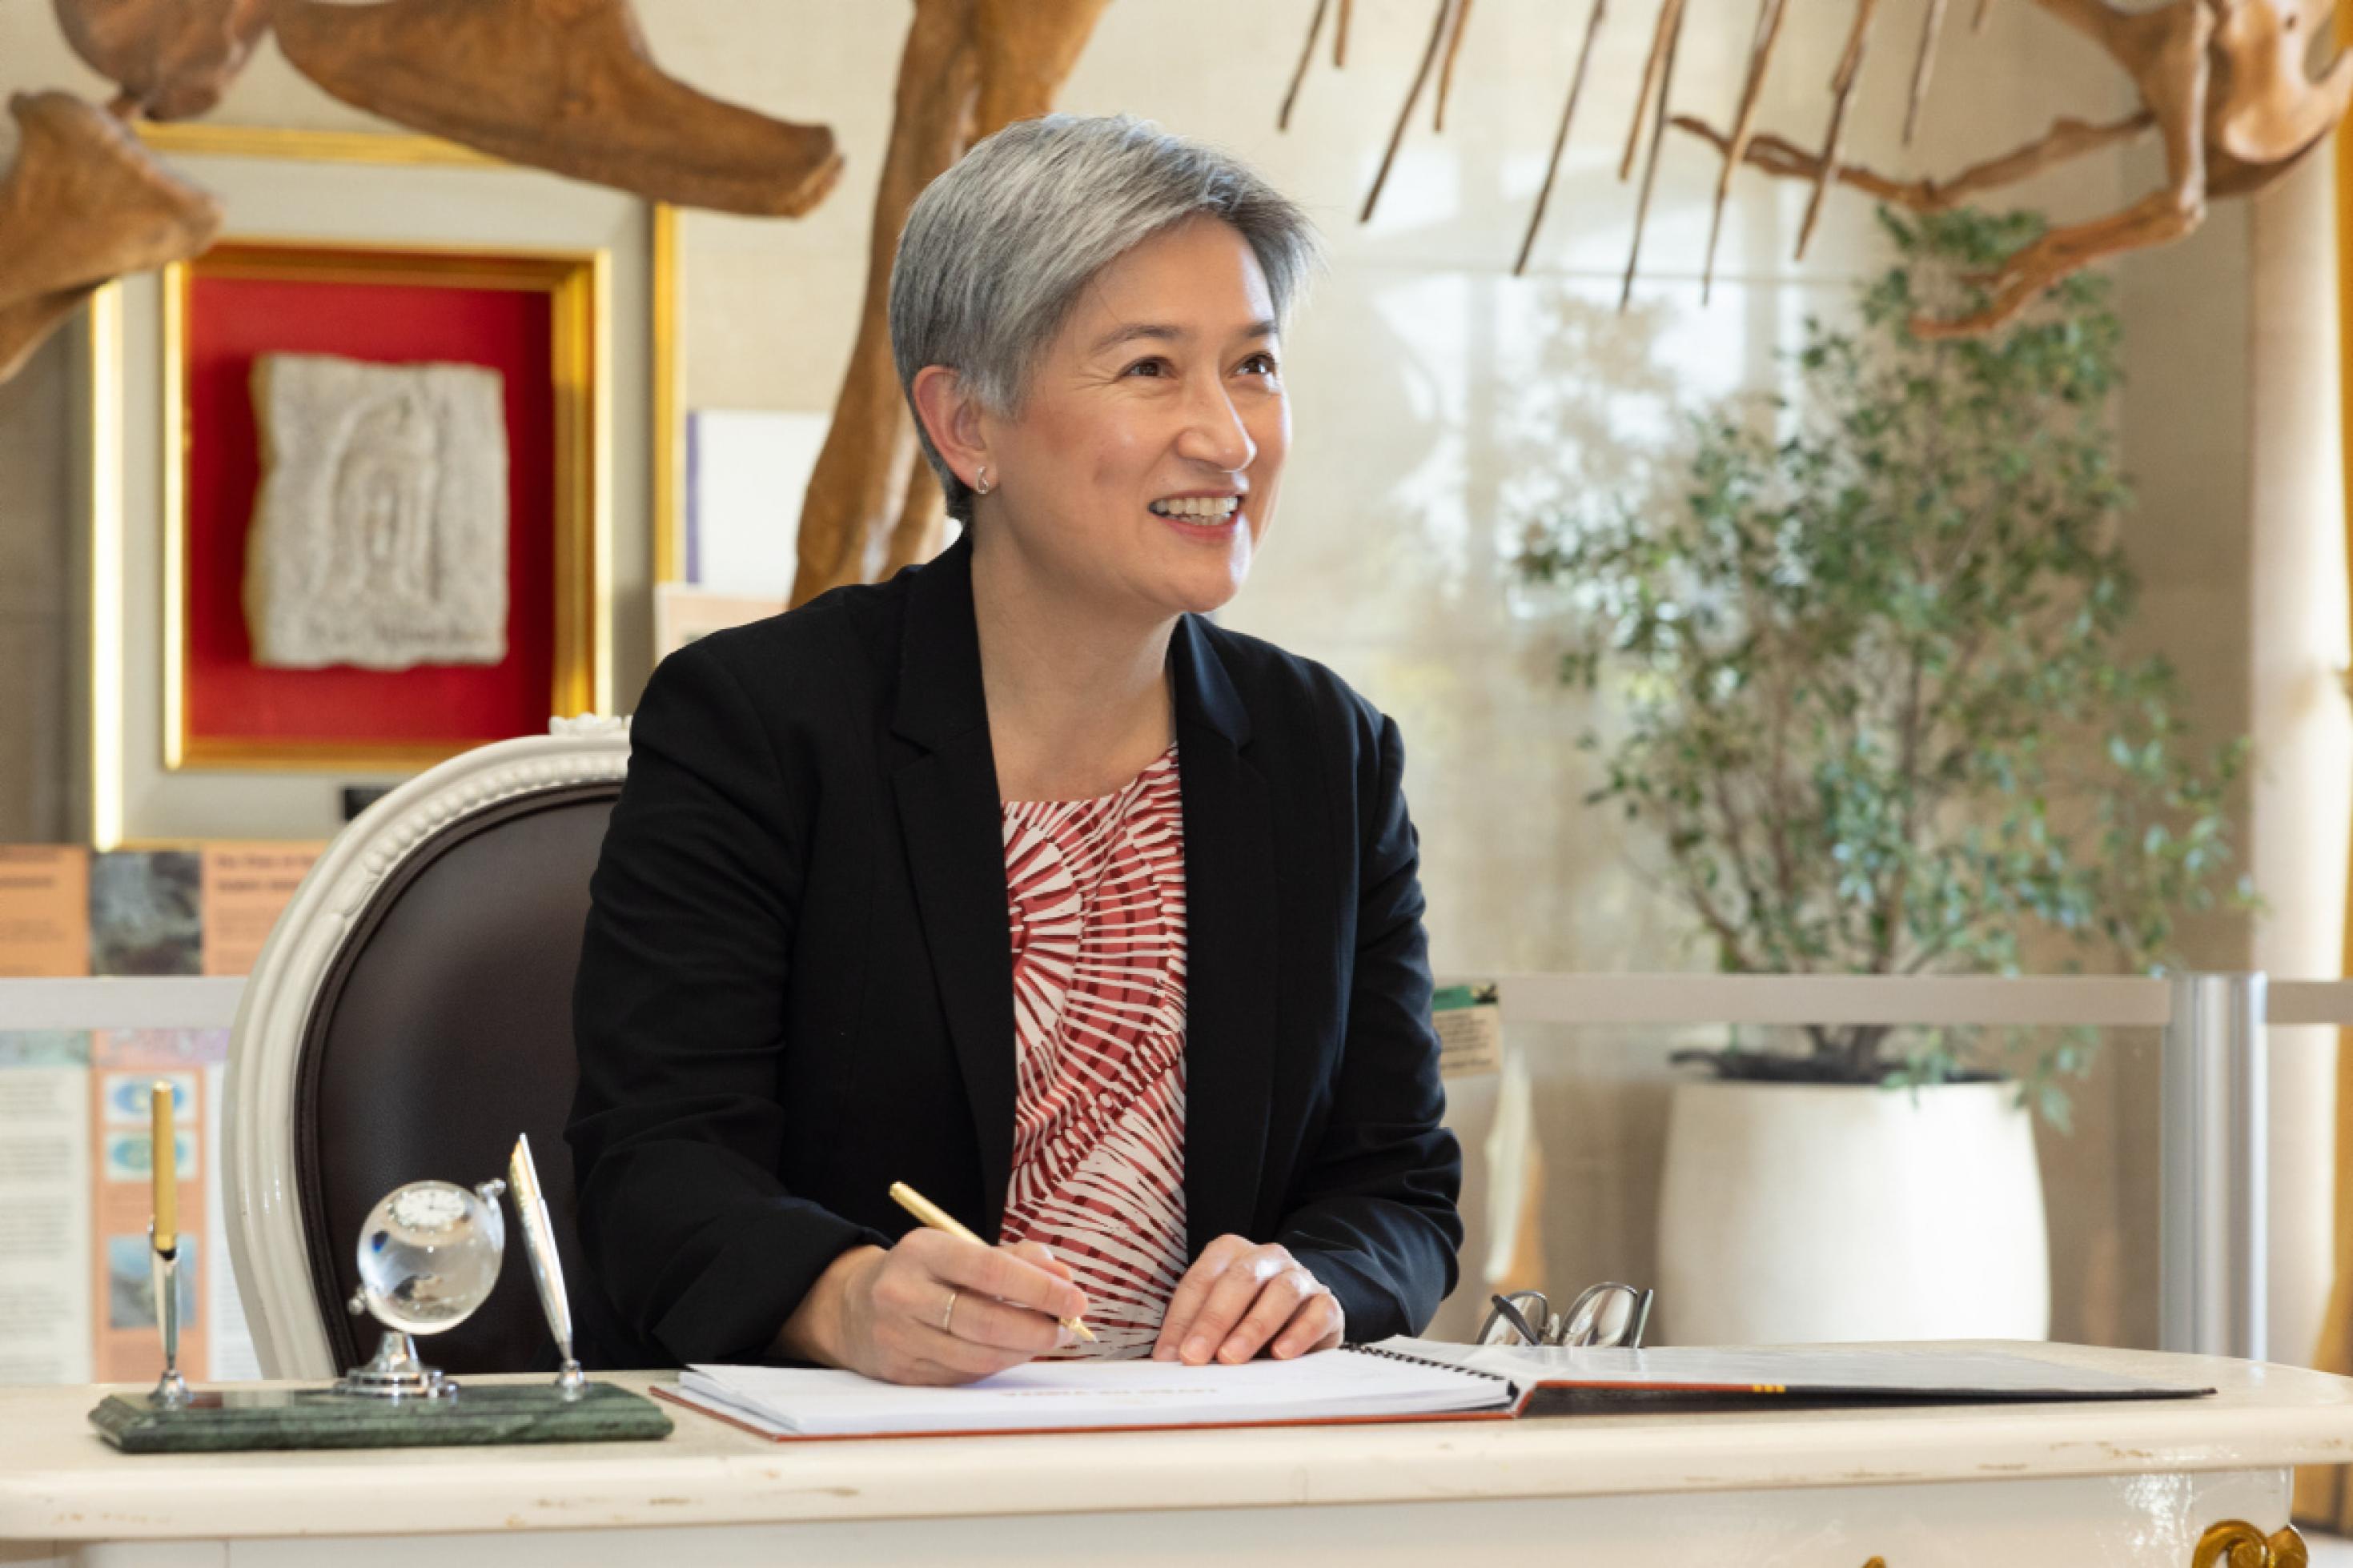 Senator the Hon Penny Wong, Minister for Foreign Affairs, signs a guestbook for official guests, before meeting with His Excellency Dr José Ramos-Horta, President of Timor-Leste, at the Presidential Palace in Timor Leste. The meeting takes place as part of Foreign Minister Wong's visit to Dili, Timor Leste.

Australian attendees: ?
-  Senator the Hon Penny Wong, Minister for Foreign Affairs ?
-  Chargé Wilson ?
-  Mr Patrick Ingle, Policy Adviser to Minister Wong ?
-  Ms Phoebe Bowden, Press Secretary to Minister Wong ?
-  Ms Michelle Chan, Deputy Secretary, Southeast Asia and Global Partners Group, DFAT ?
-  The Hon Steve Bracks AC, Australia's Special Representative for Greater Sunrise ?
-  Ms Jenny Samiec, Executive Officer to Australia's Special Representative ?
-  Mr Glenn Maloney, Second Secretary (Political), Australian Embassy Dili?
-  Ms Langridge ?
July 7, 2023.